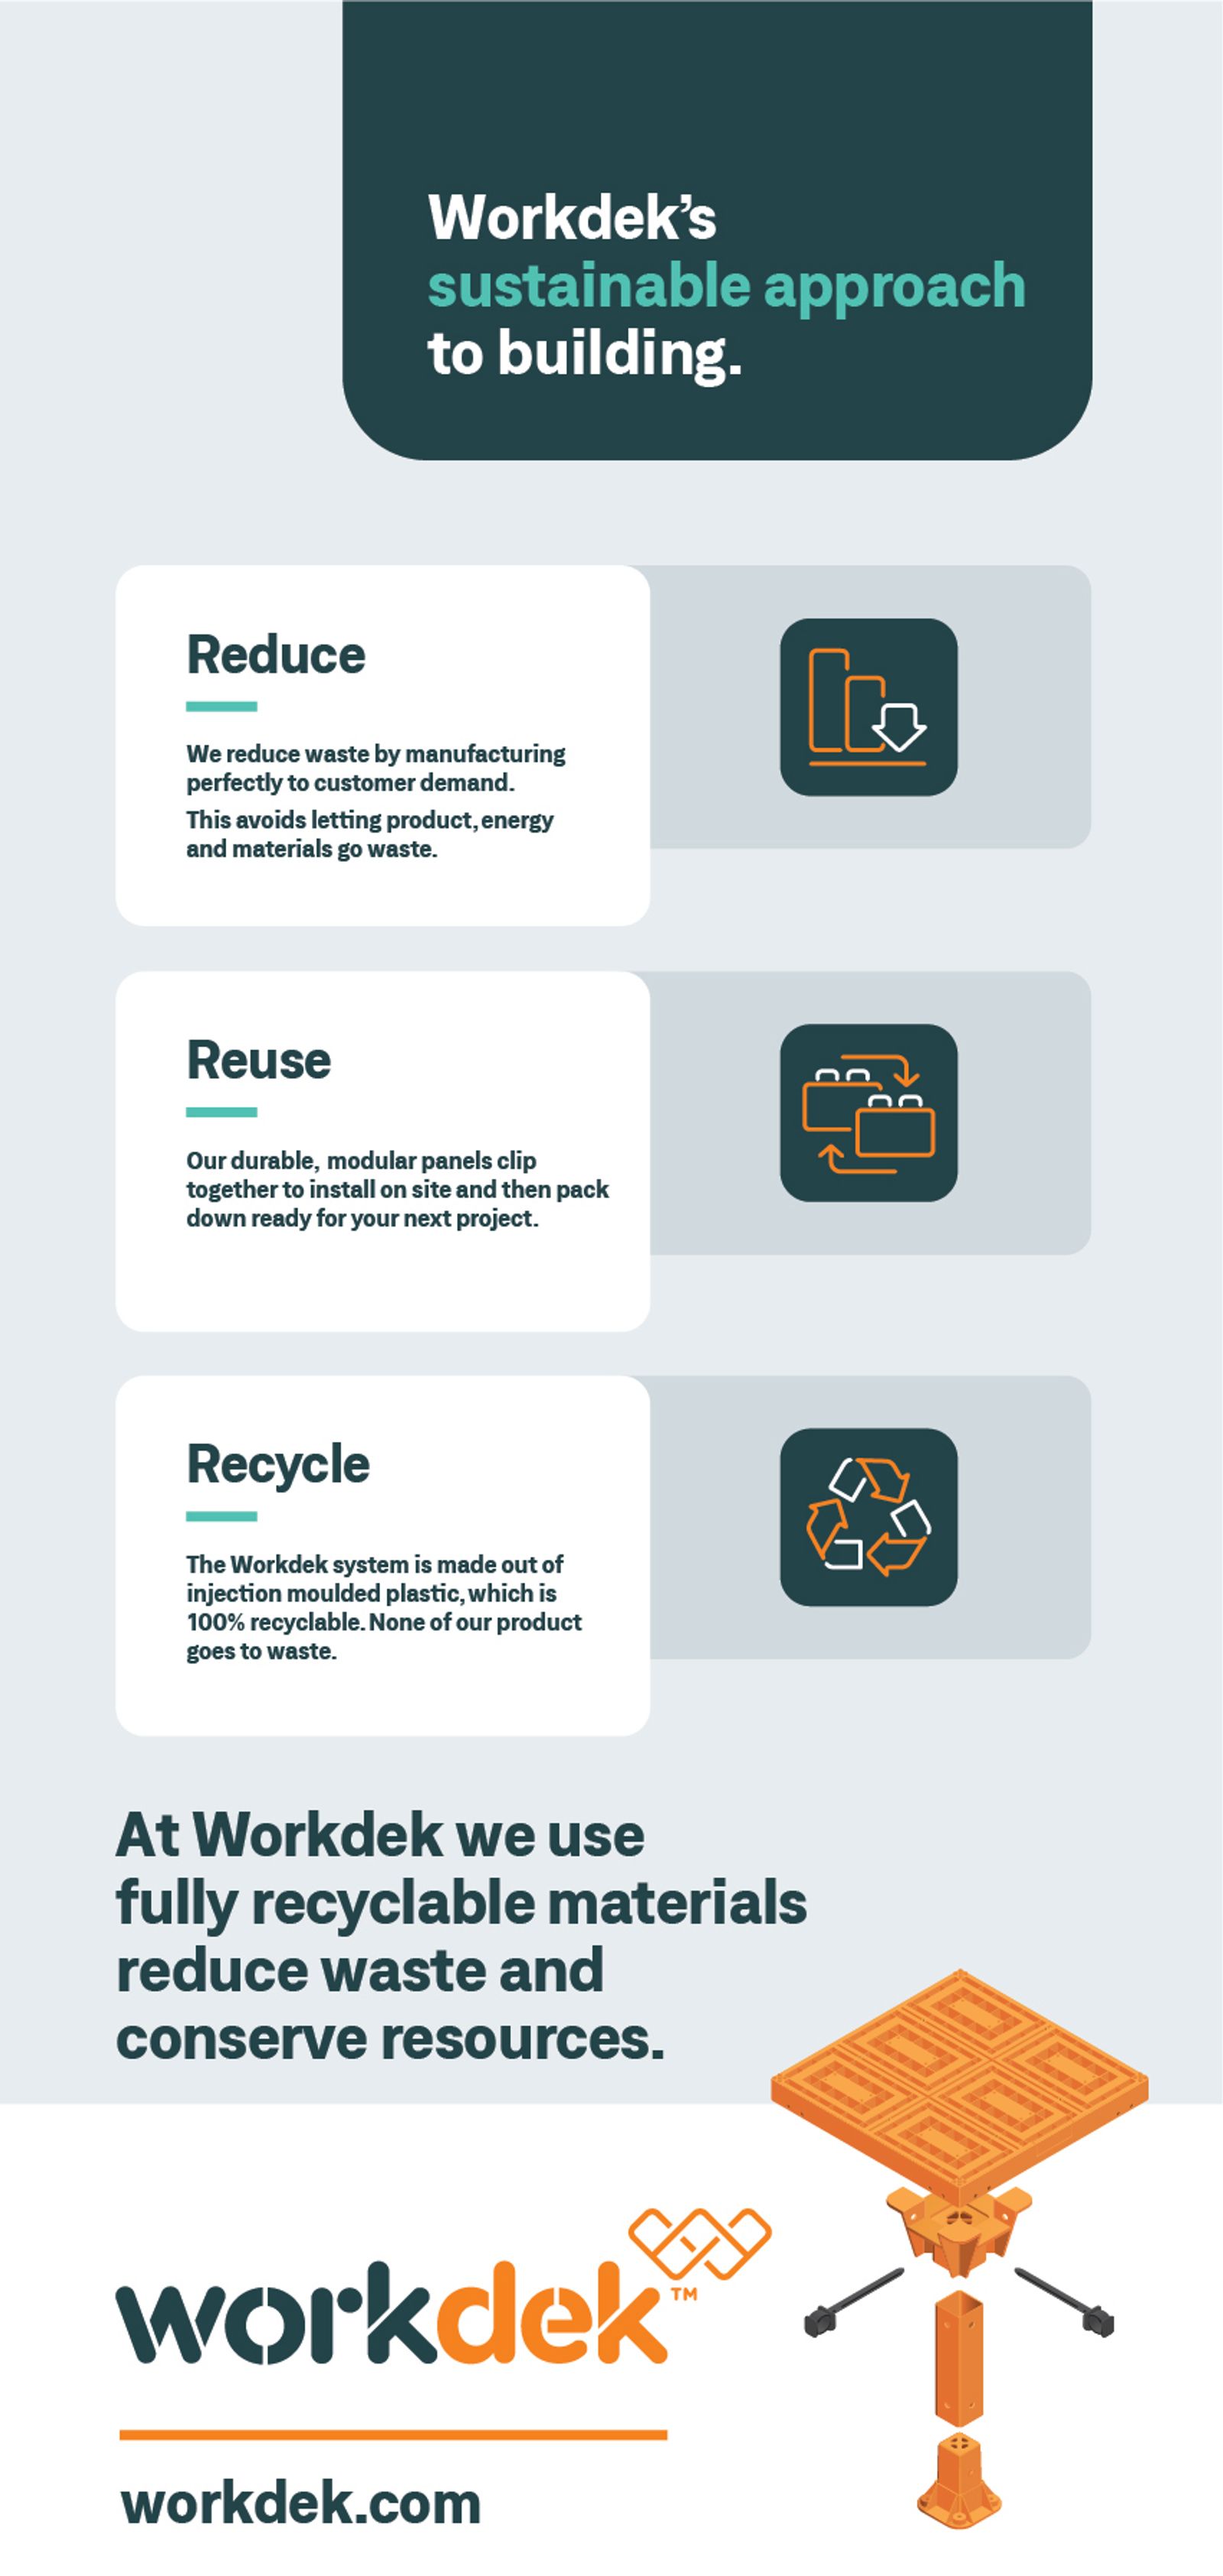 Workdek's sustainable approach to building